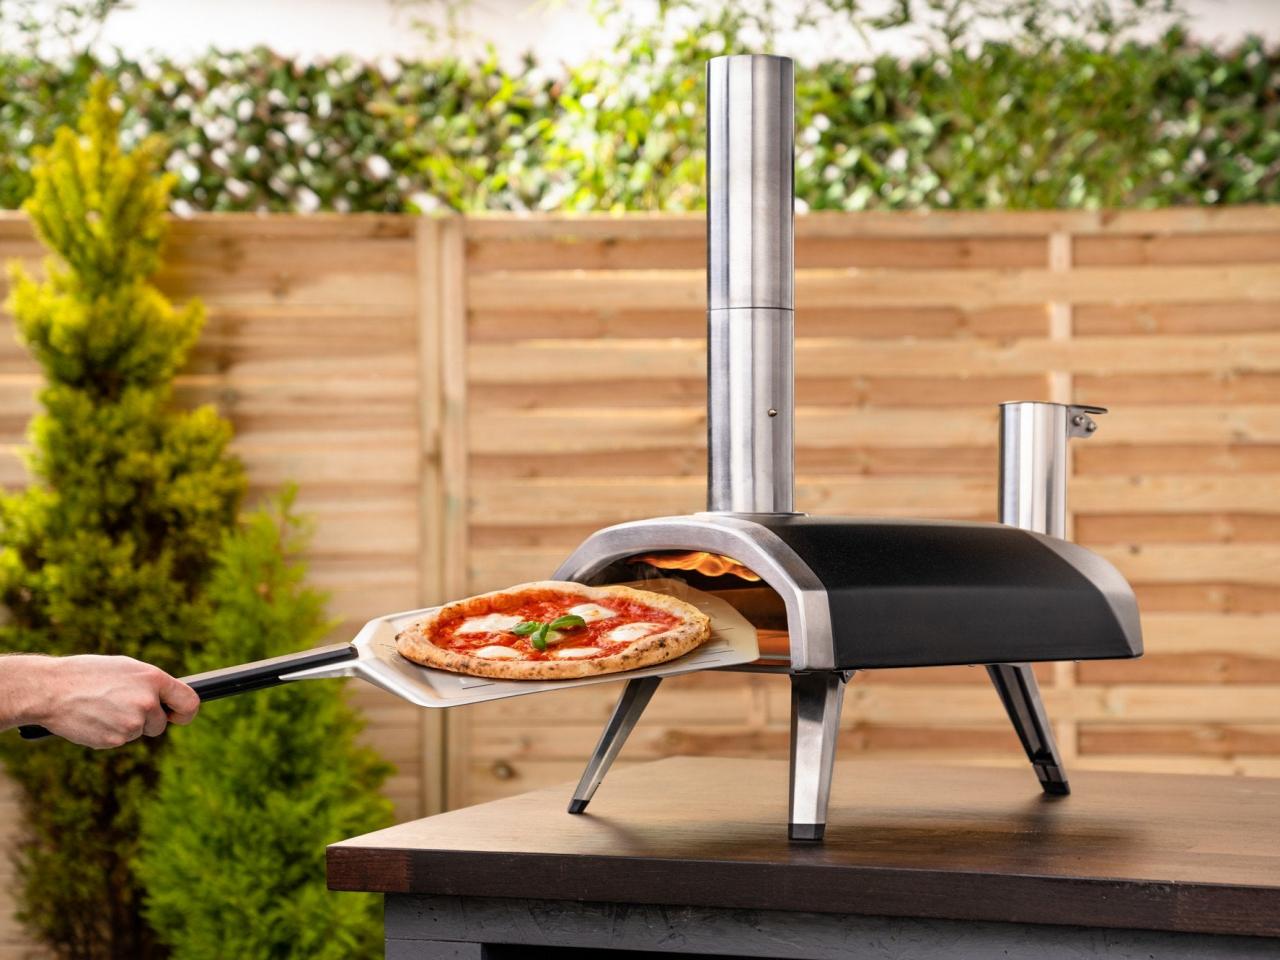 Breville Pizzaiolo Review 2023 - What Is the Breville Pizza Oven?, Shopping : Food Network